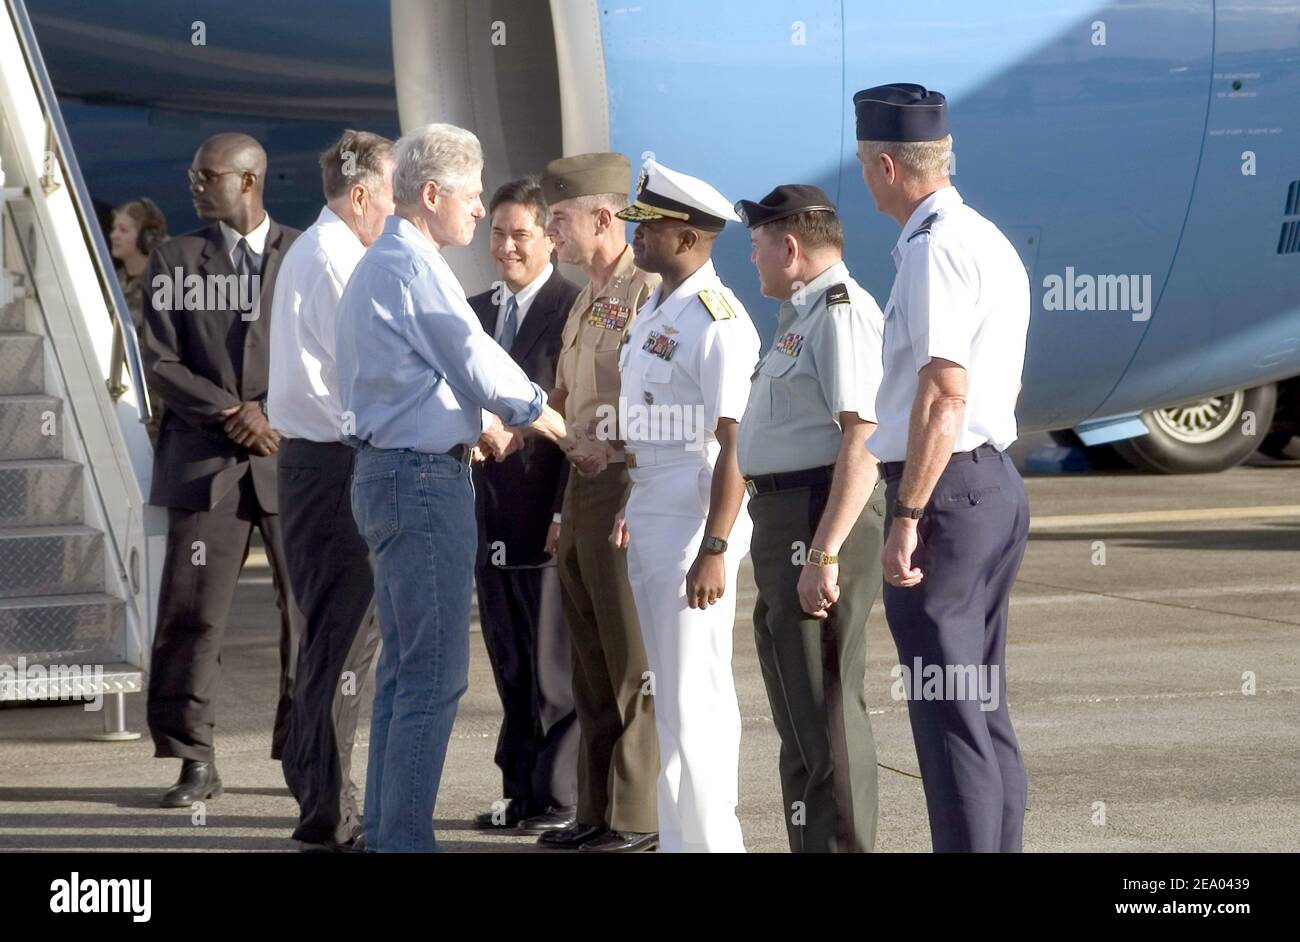 Former President Bill Clinton greets Commander, U.S. Naval Forces Marianas, Rear Adm. Arthur J. Johnson, during a fuel stop at Andersen Air Force Base on the U.S. territory of Yigo, Guam. Presidents Bush and Clinton are touring Sri Lanka, Thailand and Indonesia to see first hand, the effects the tsunami had on Southeast Asia on February 19, 2005. Photo by Nathanael T. Miller/USN via ABACA. Stock Photo